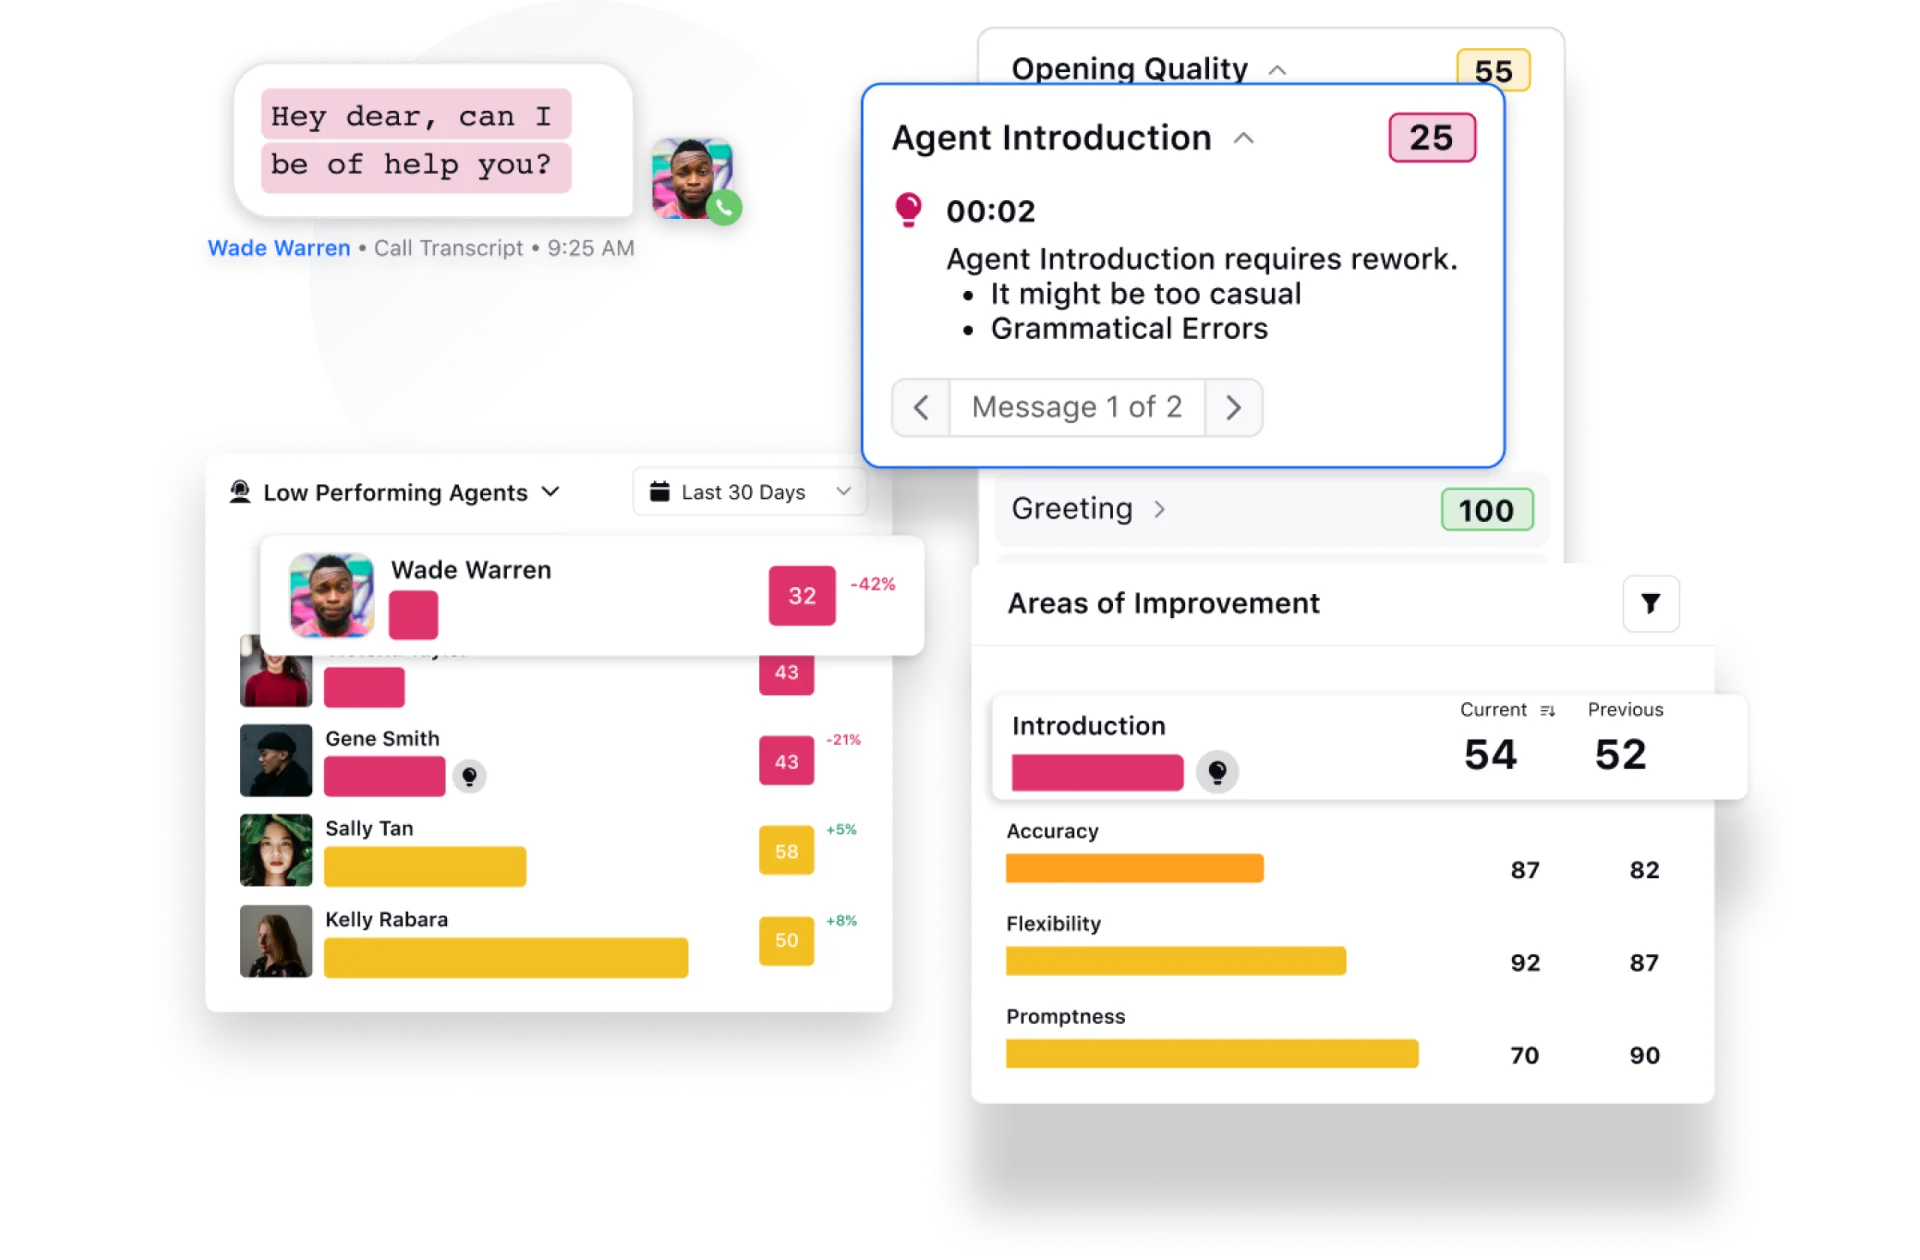 Automated Scoring with Sprinklr Quality Management Software